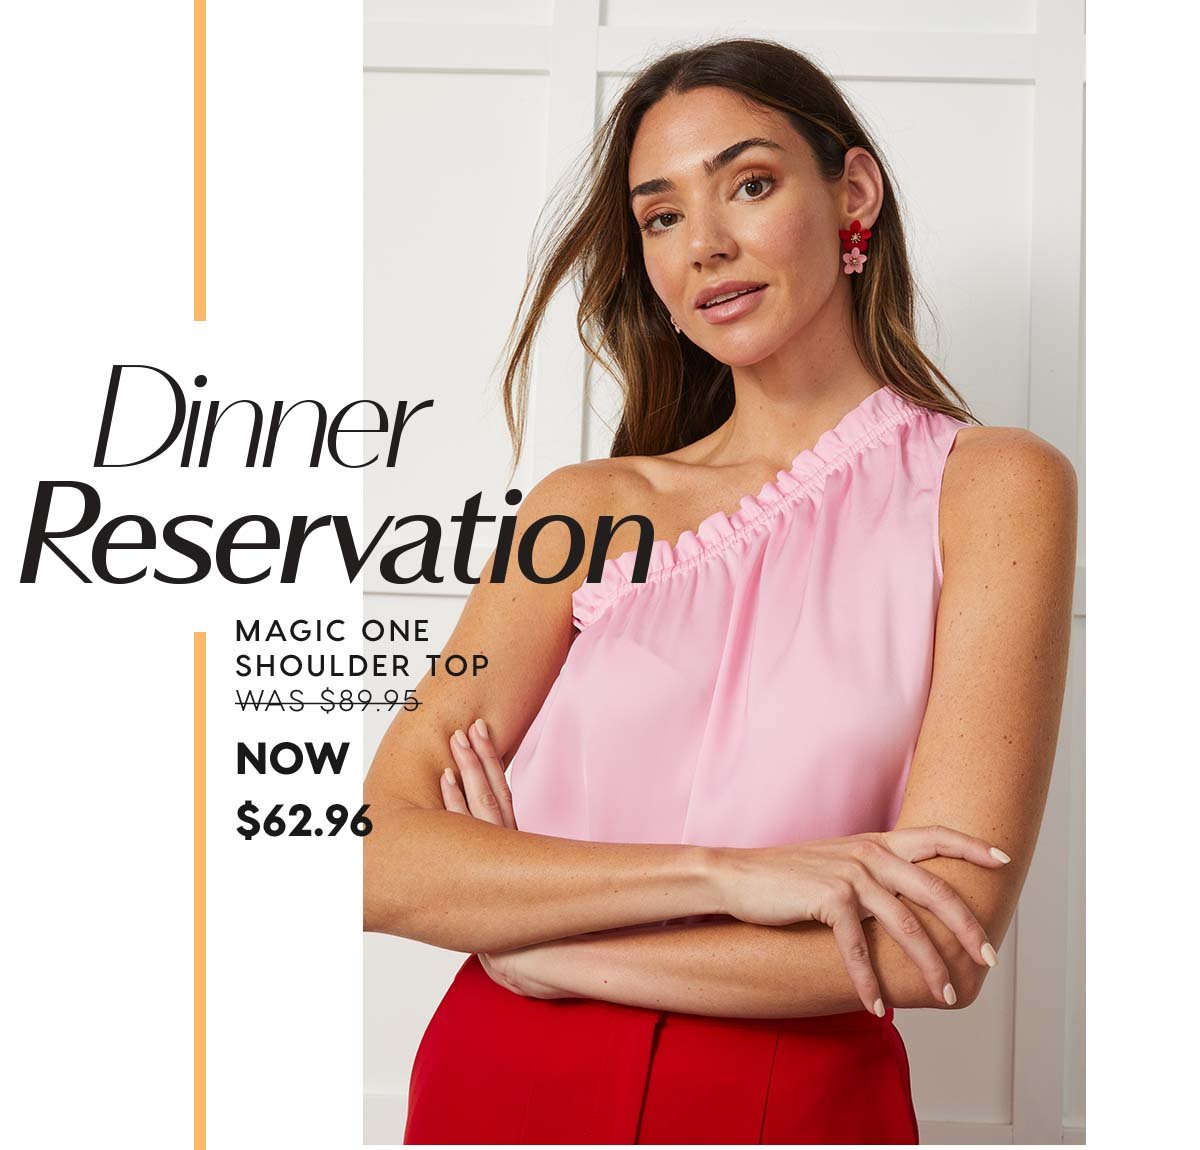 Dinner Reservation. Magic One Shoulder Top  WAS $89.95 NOW  $62.96